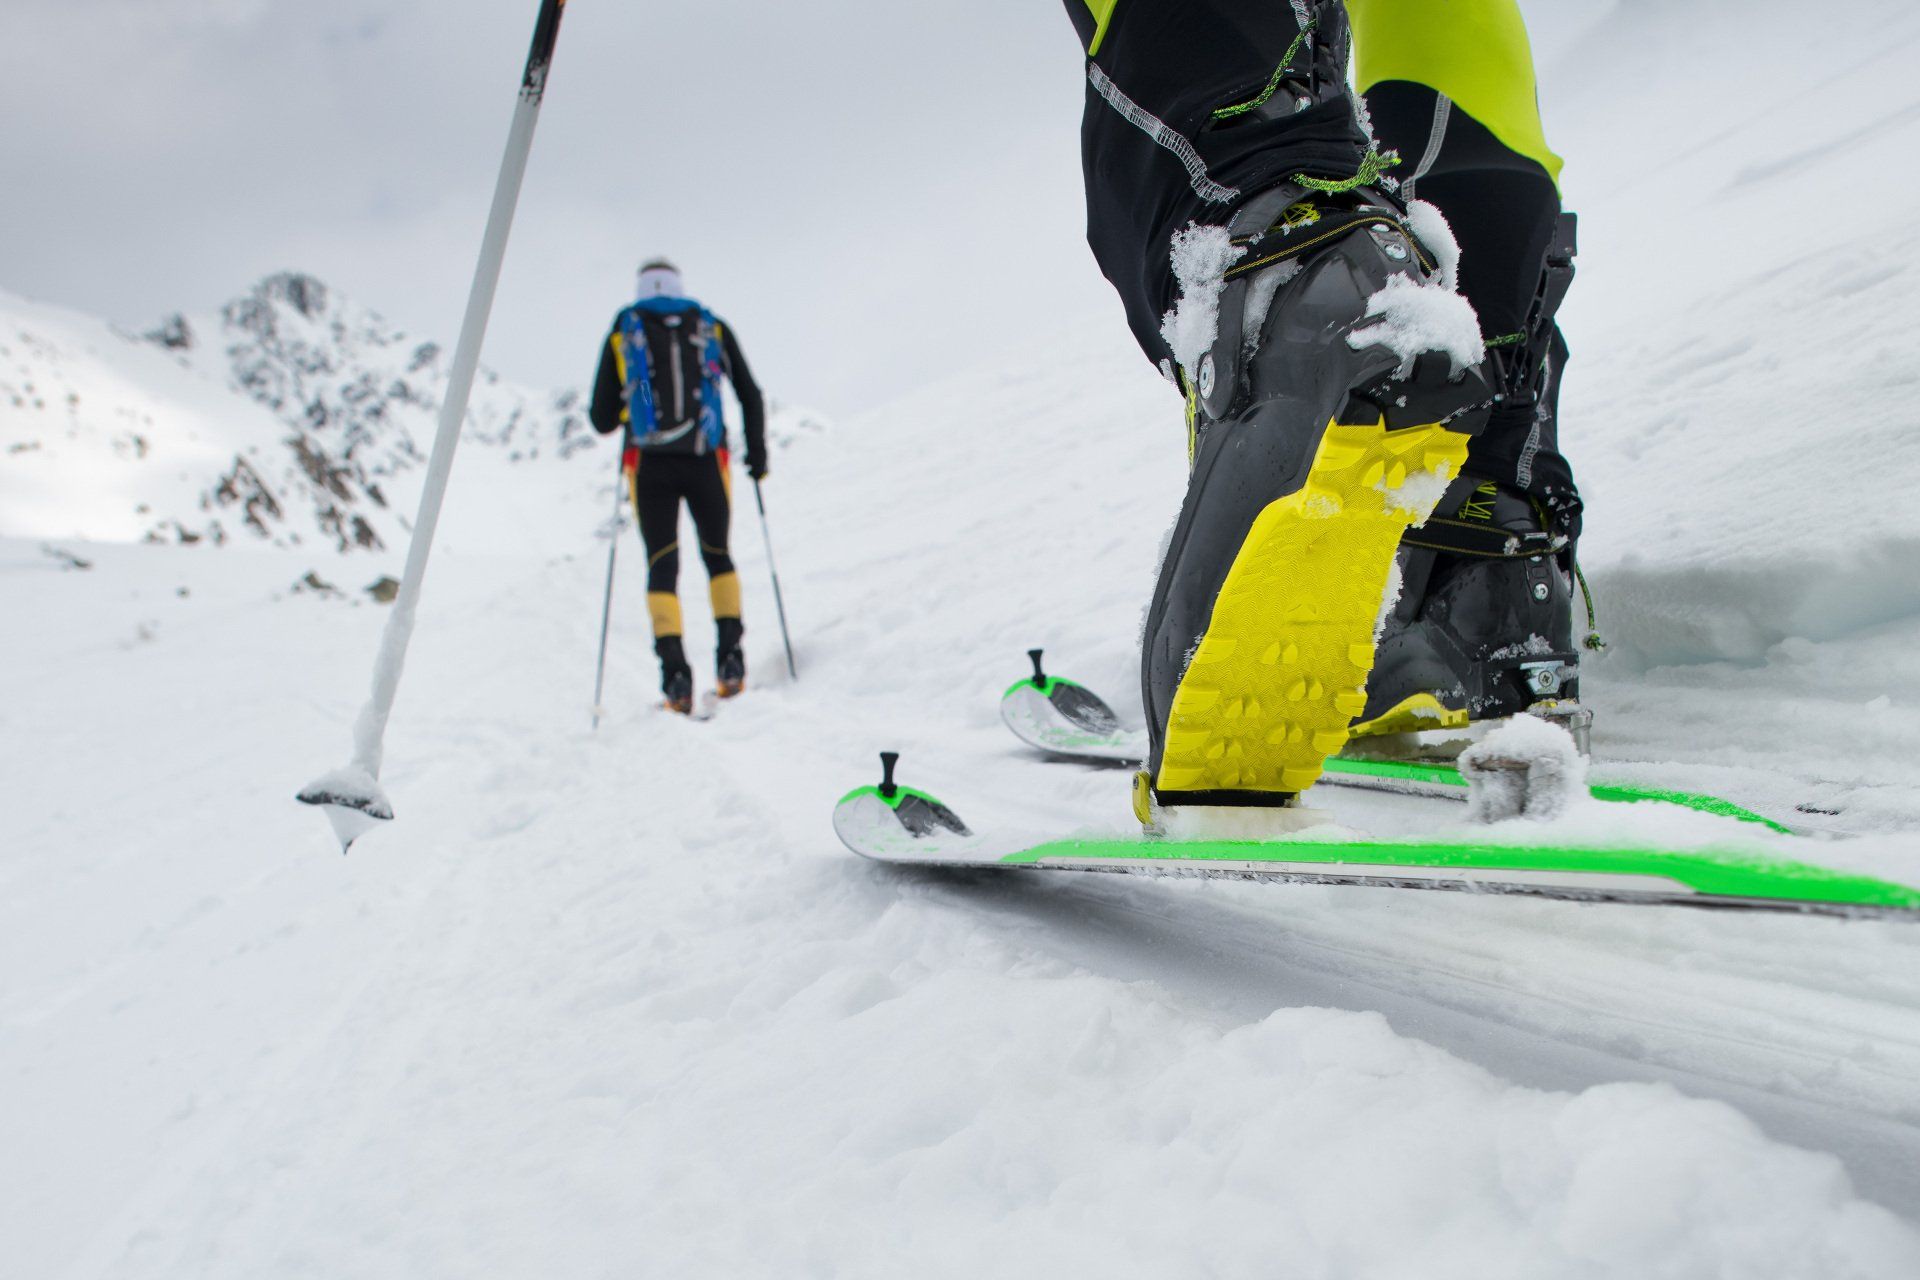 Two people ski mountaineering with a close-up of a ski boot